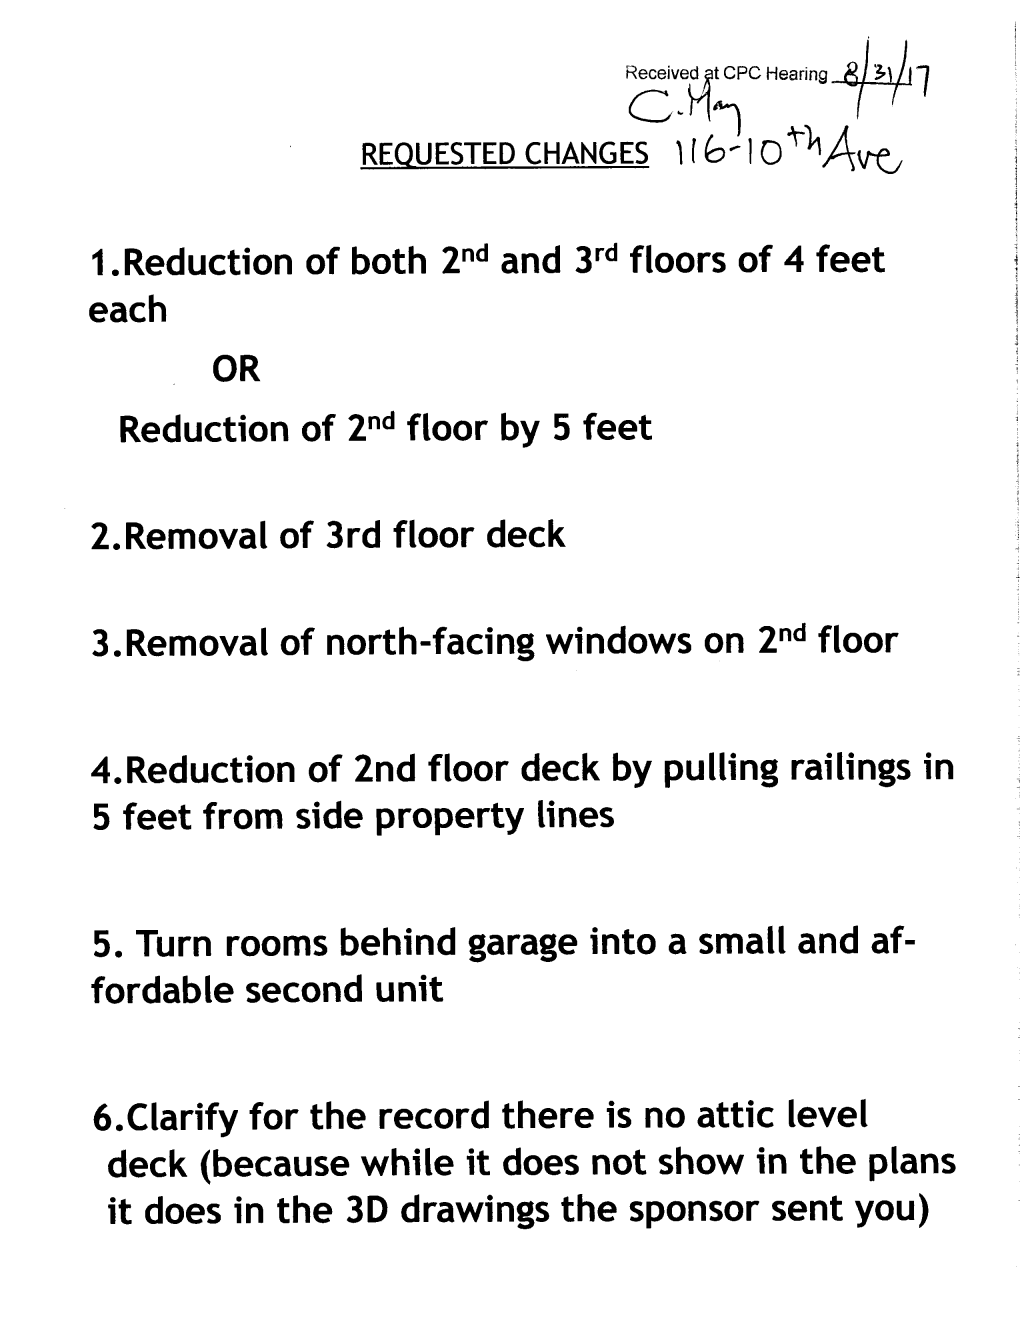 1. Reduction of Both 2"D and 3~D Floors of 4 Feet Each